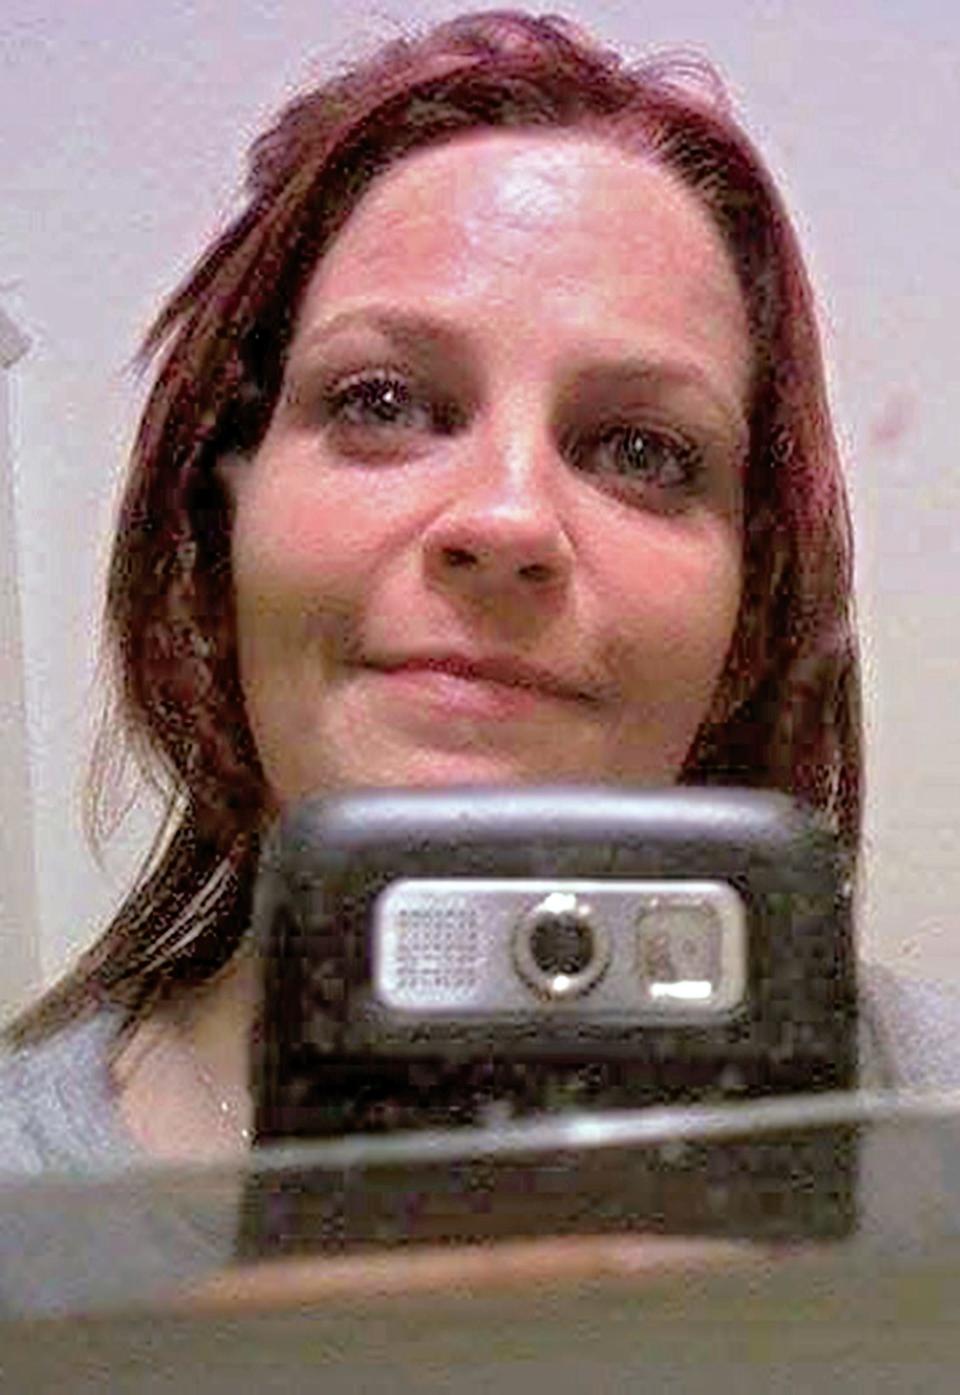 Stacey Garrett, 39, died of a rare stroke at a hospital in 2018 after being incarcerated at the Pottawatomie County jail. The autopsy report listed substance use as a contributing factor and could not determine if her death was natural, accidental or intentional.